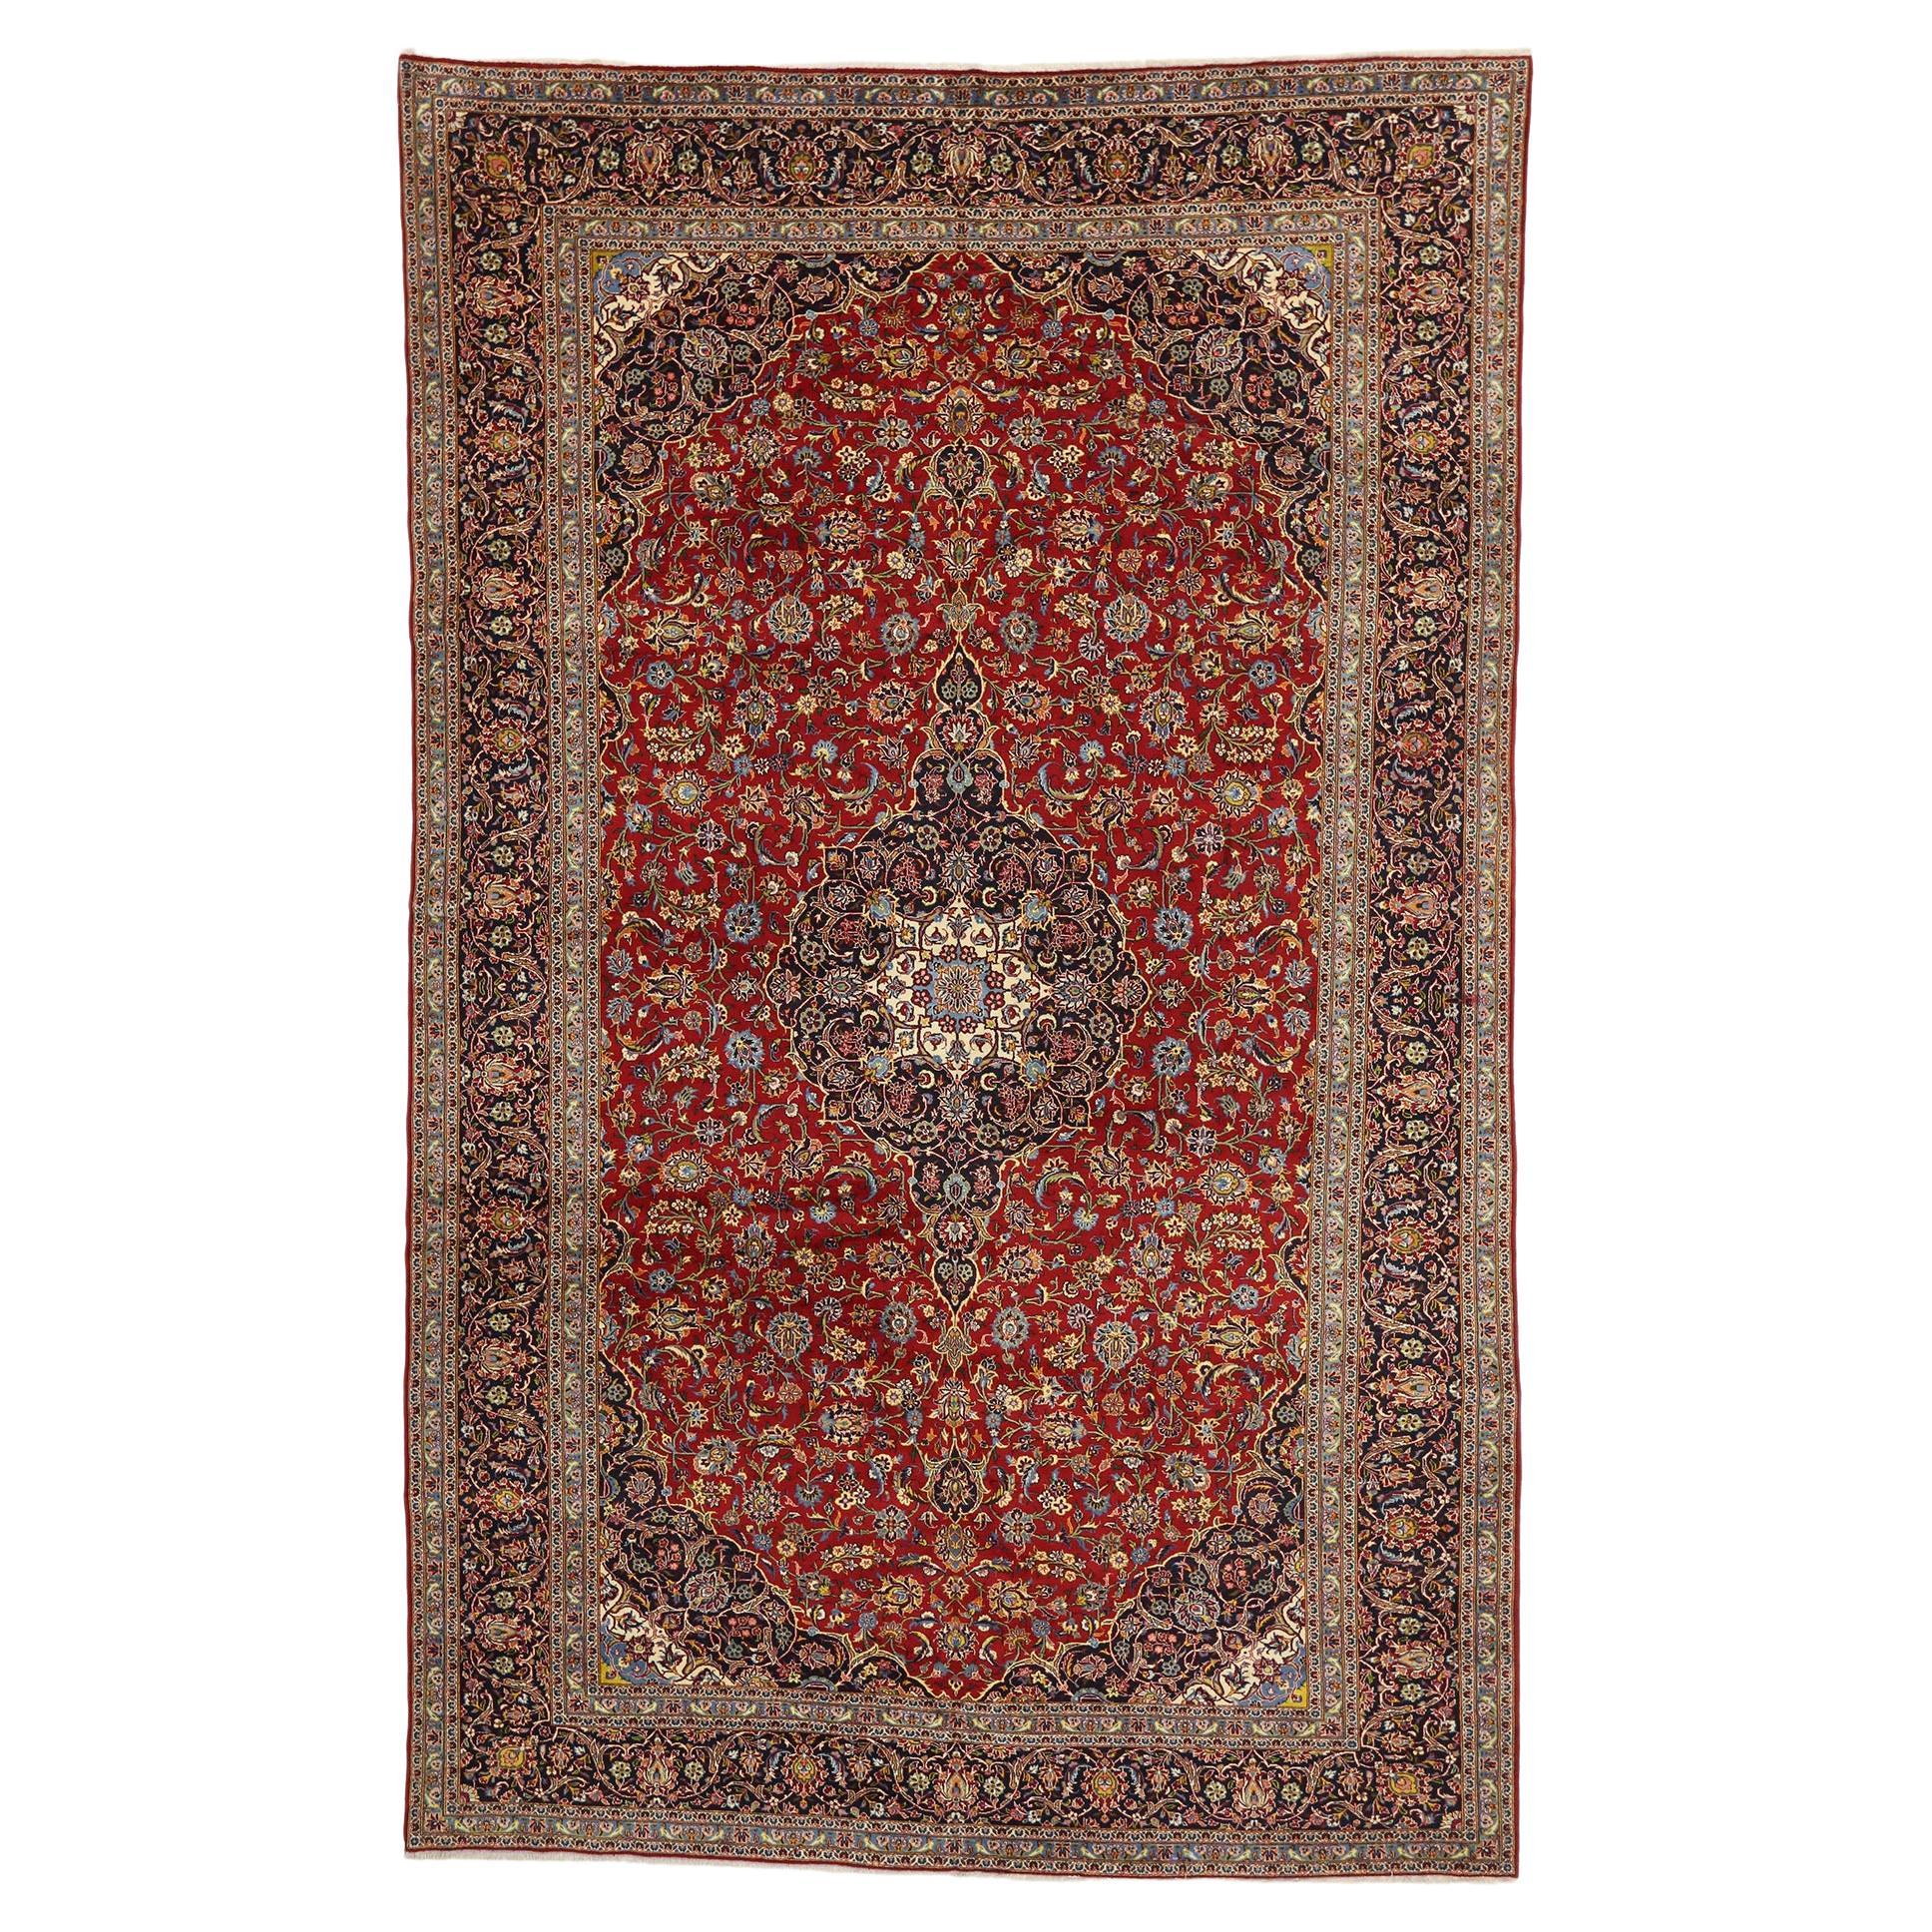 Vintage Persian Kashan Rug, Traditional Sensibility Meets Stately Decadence